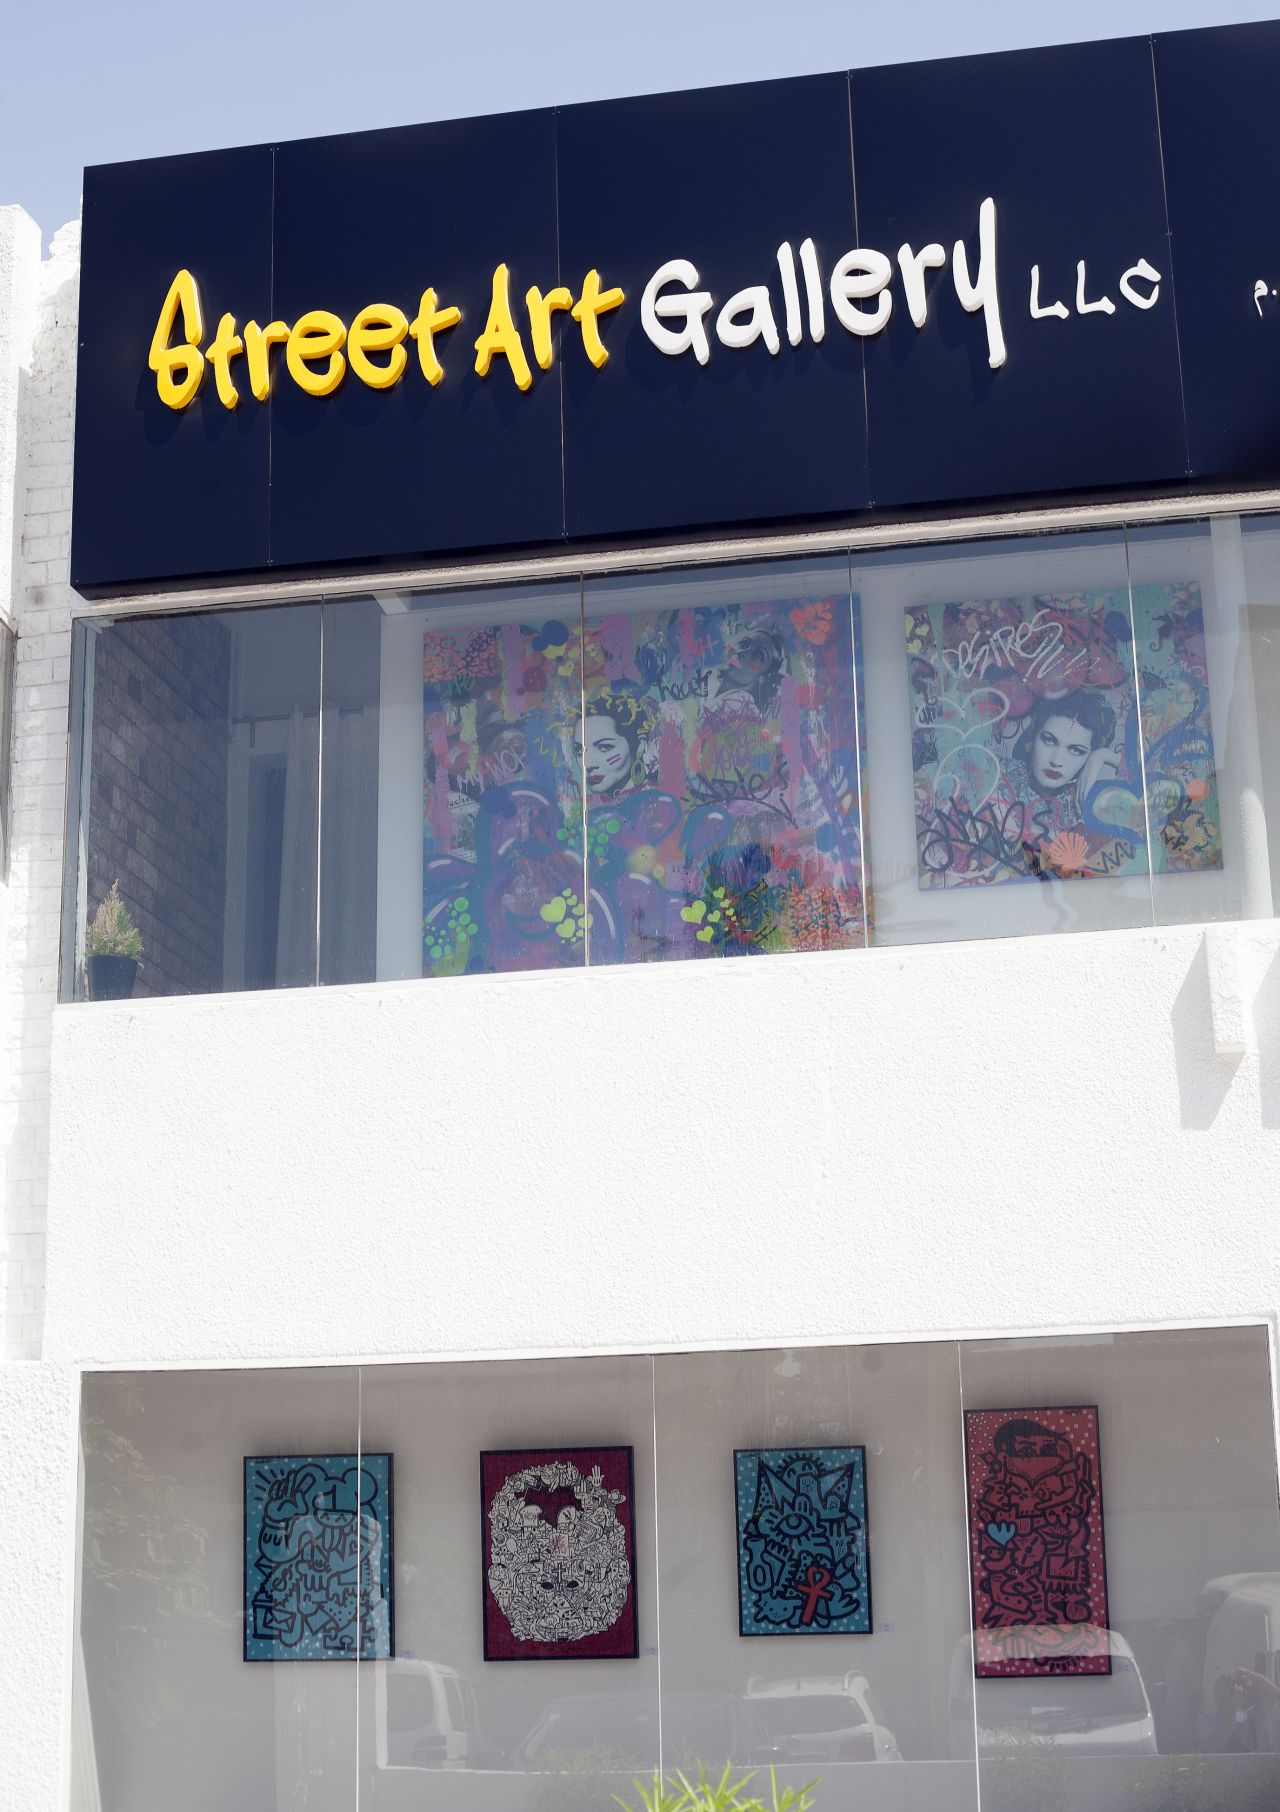 Street Art Gallery is plotting a busy 2015. Meanwhile, its own exterior white walls are gradually being replaced as visiting artists make their mark on Dubai's new art hotspot.